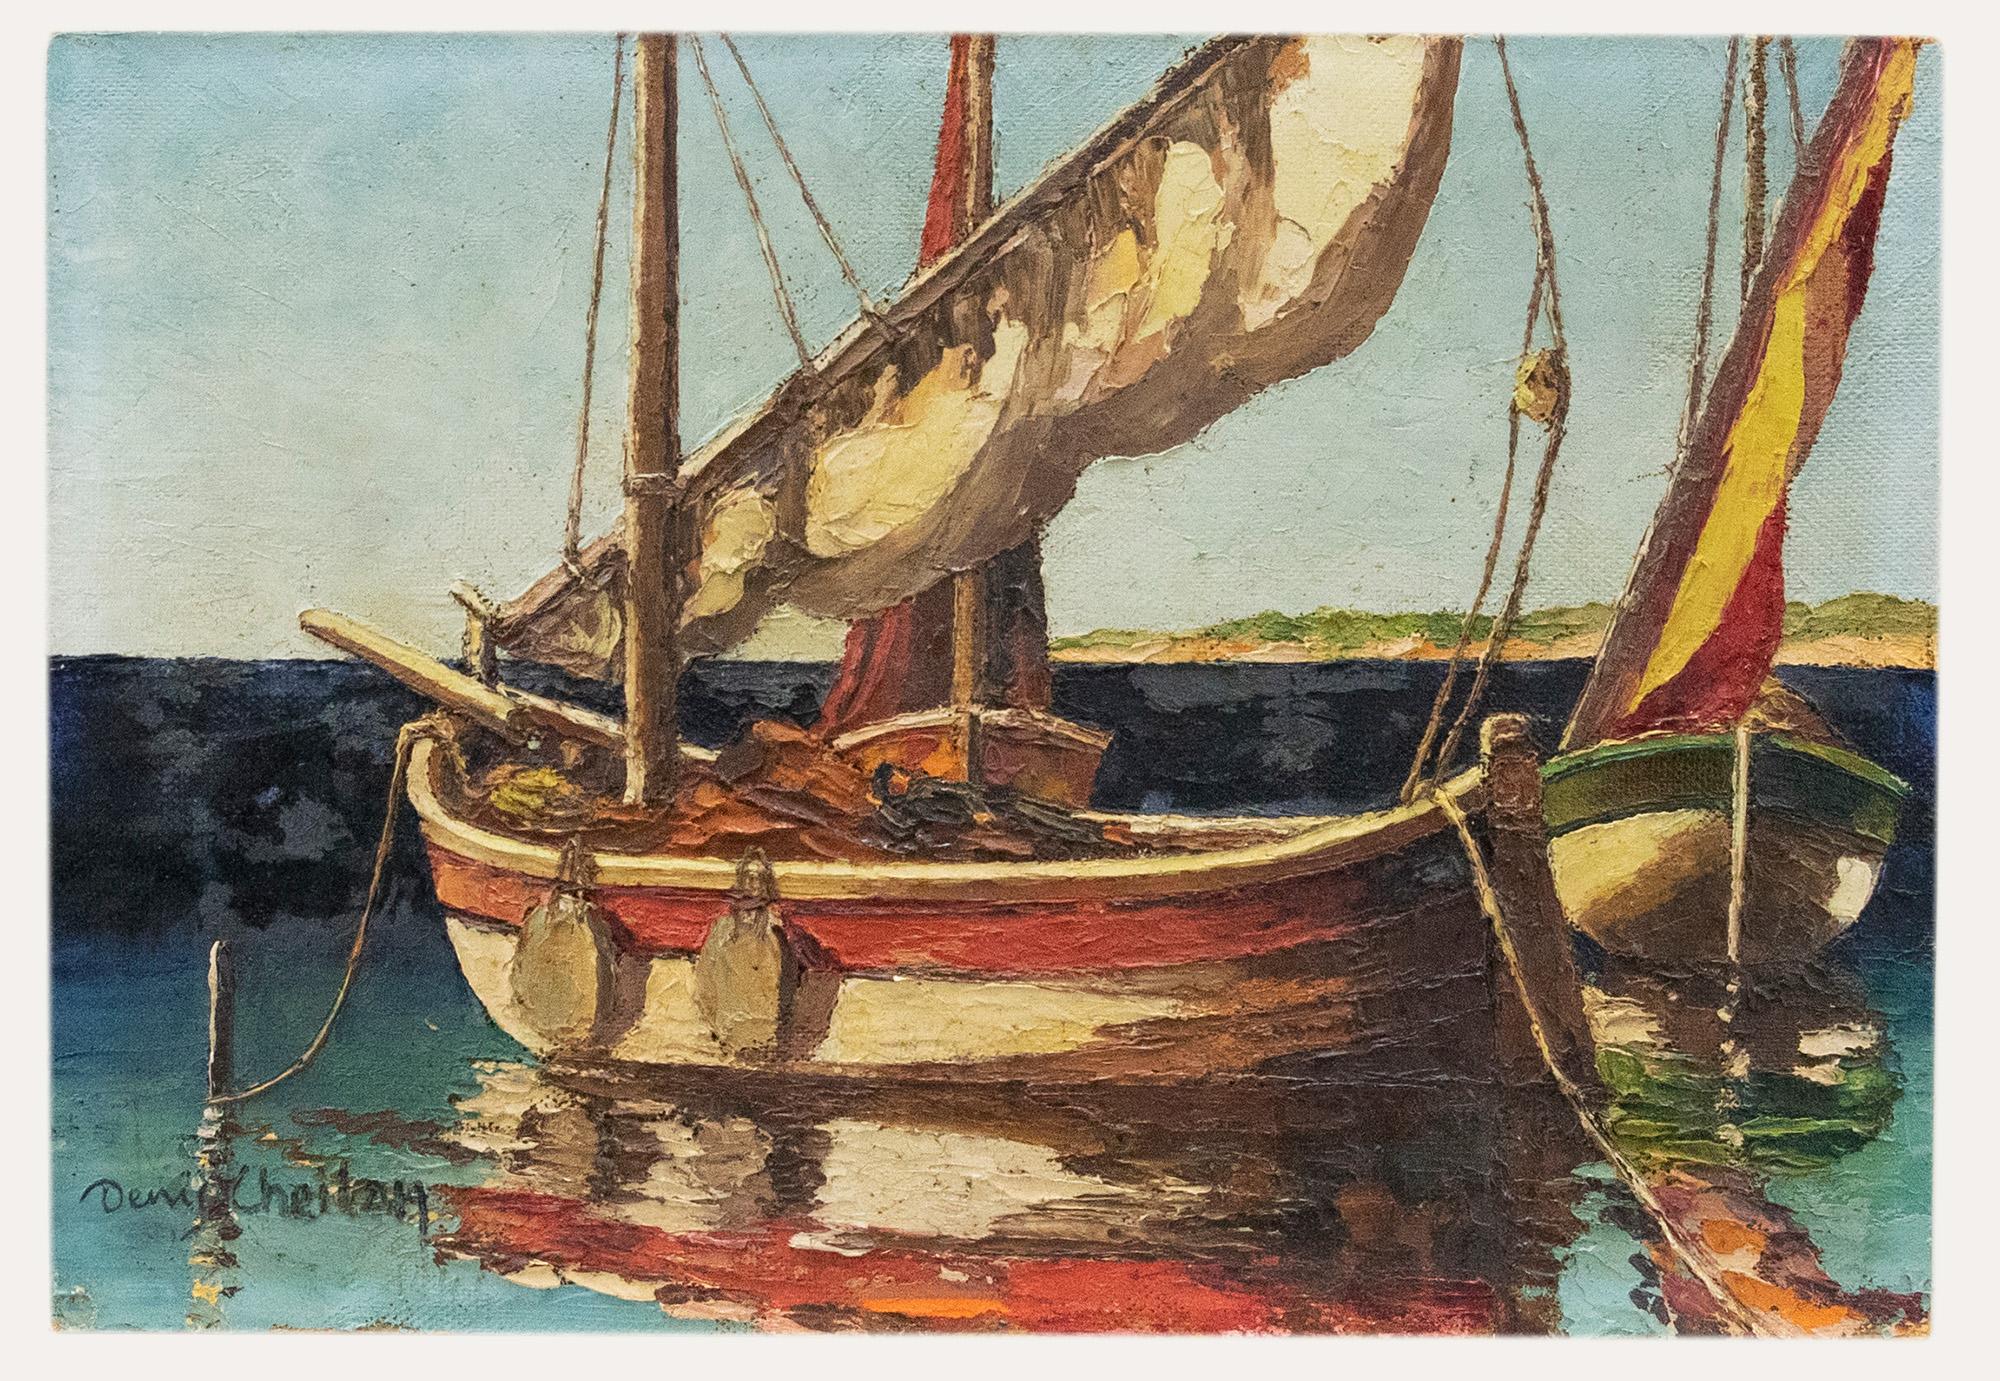 Deny Cheilan - French School 20th Century Oil, Fishing Boats - Painting by Unknown